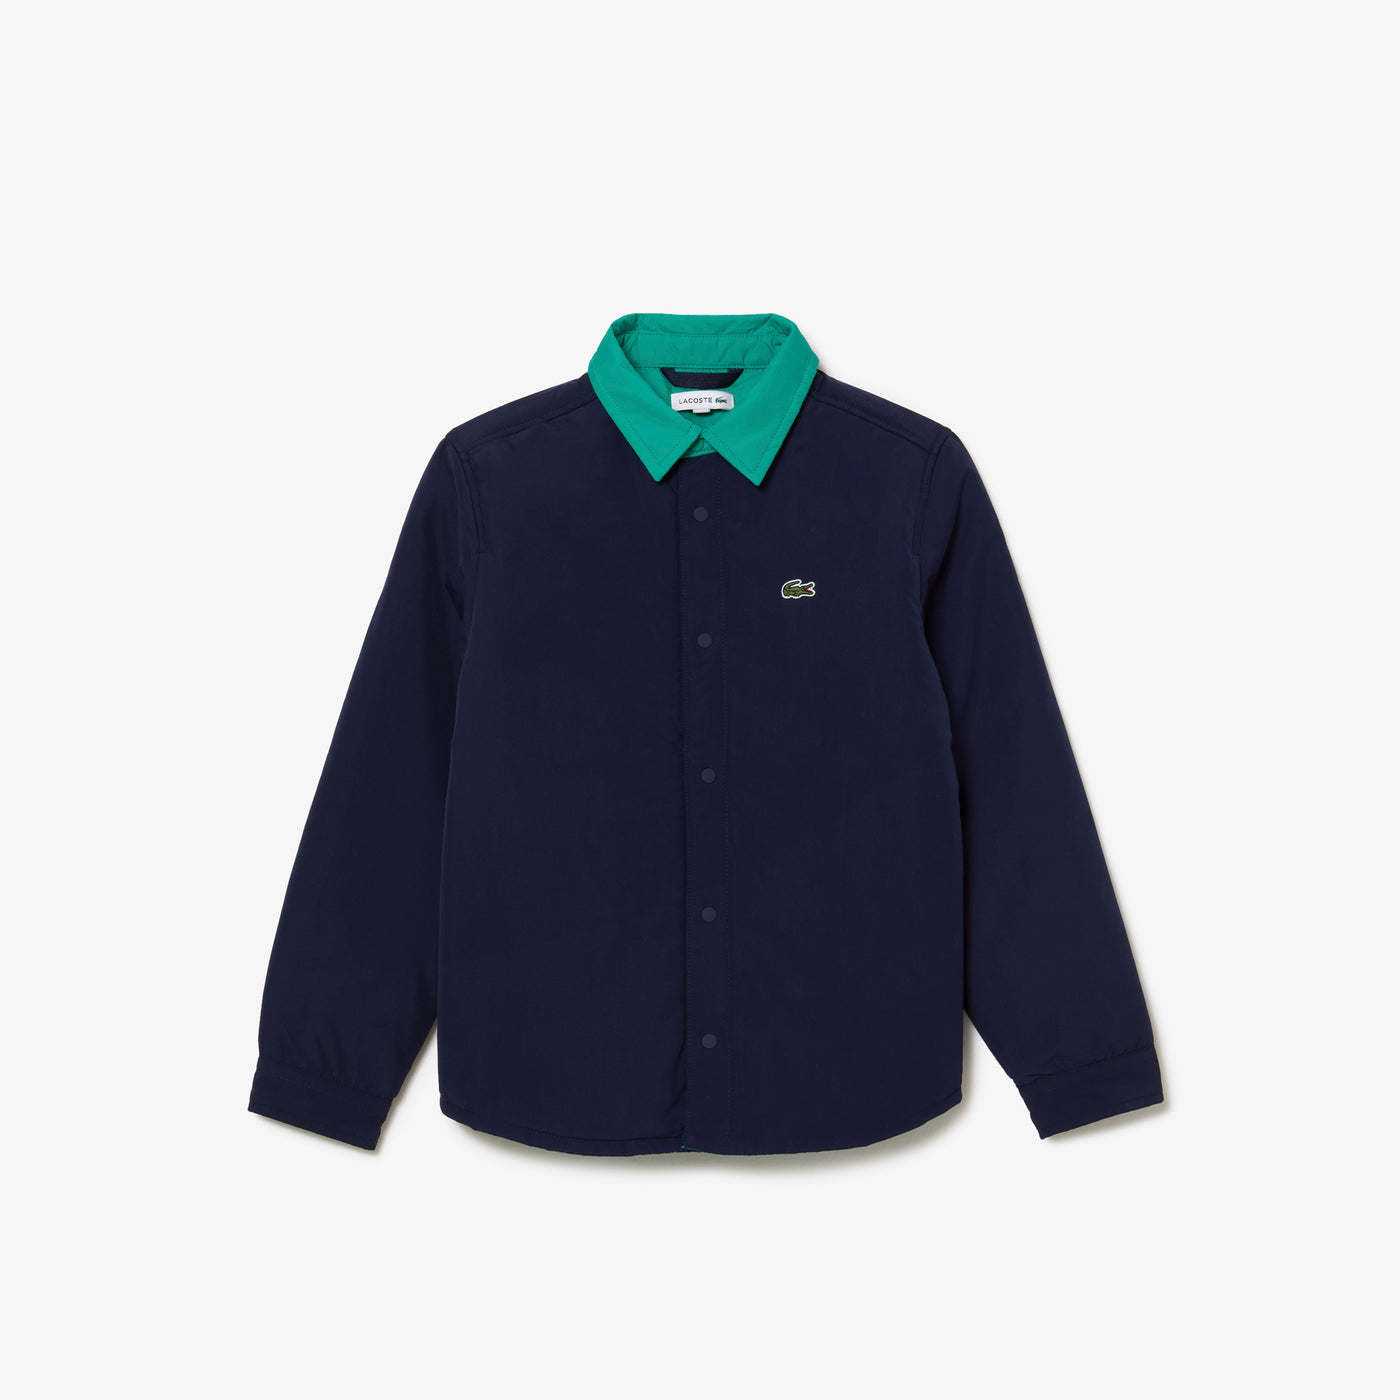 Shop The Latest Collection Of Outlet - Lacoste Boys' Lacoste Contrast Collar Water-Repellent Taffeta Shirt - Cj9814 In Lebanon